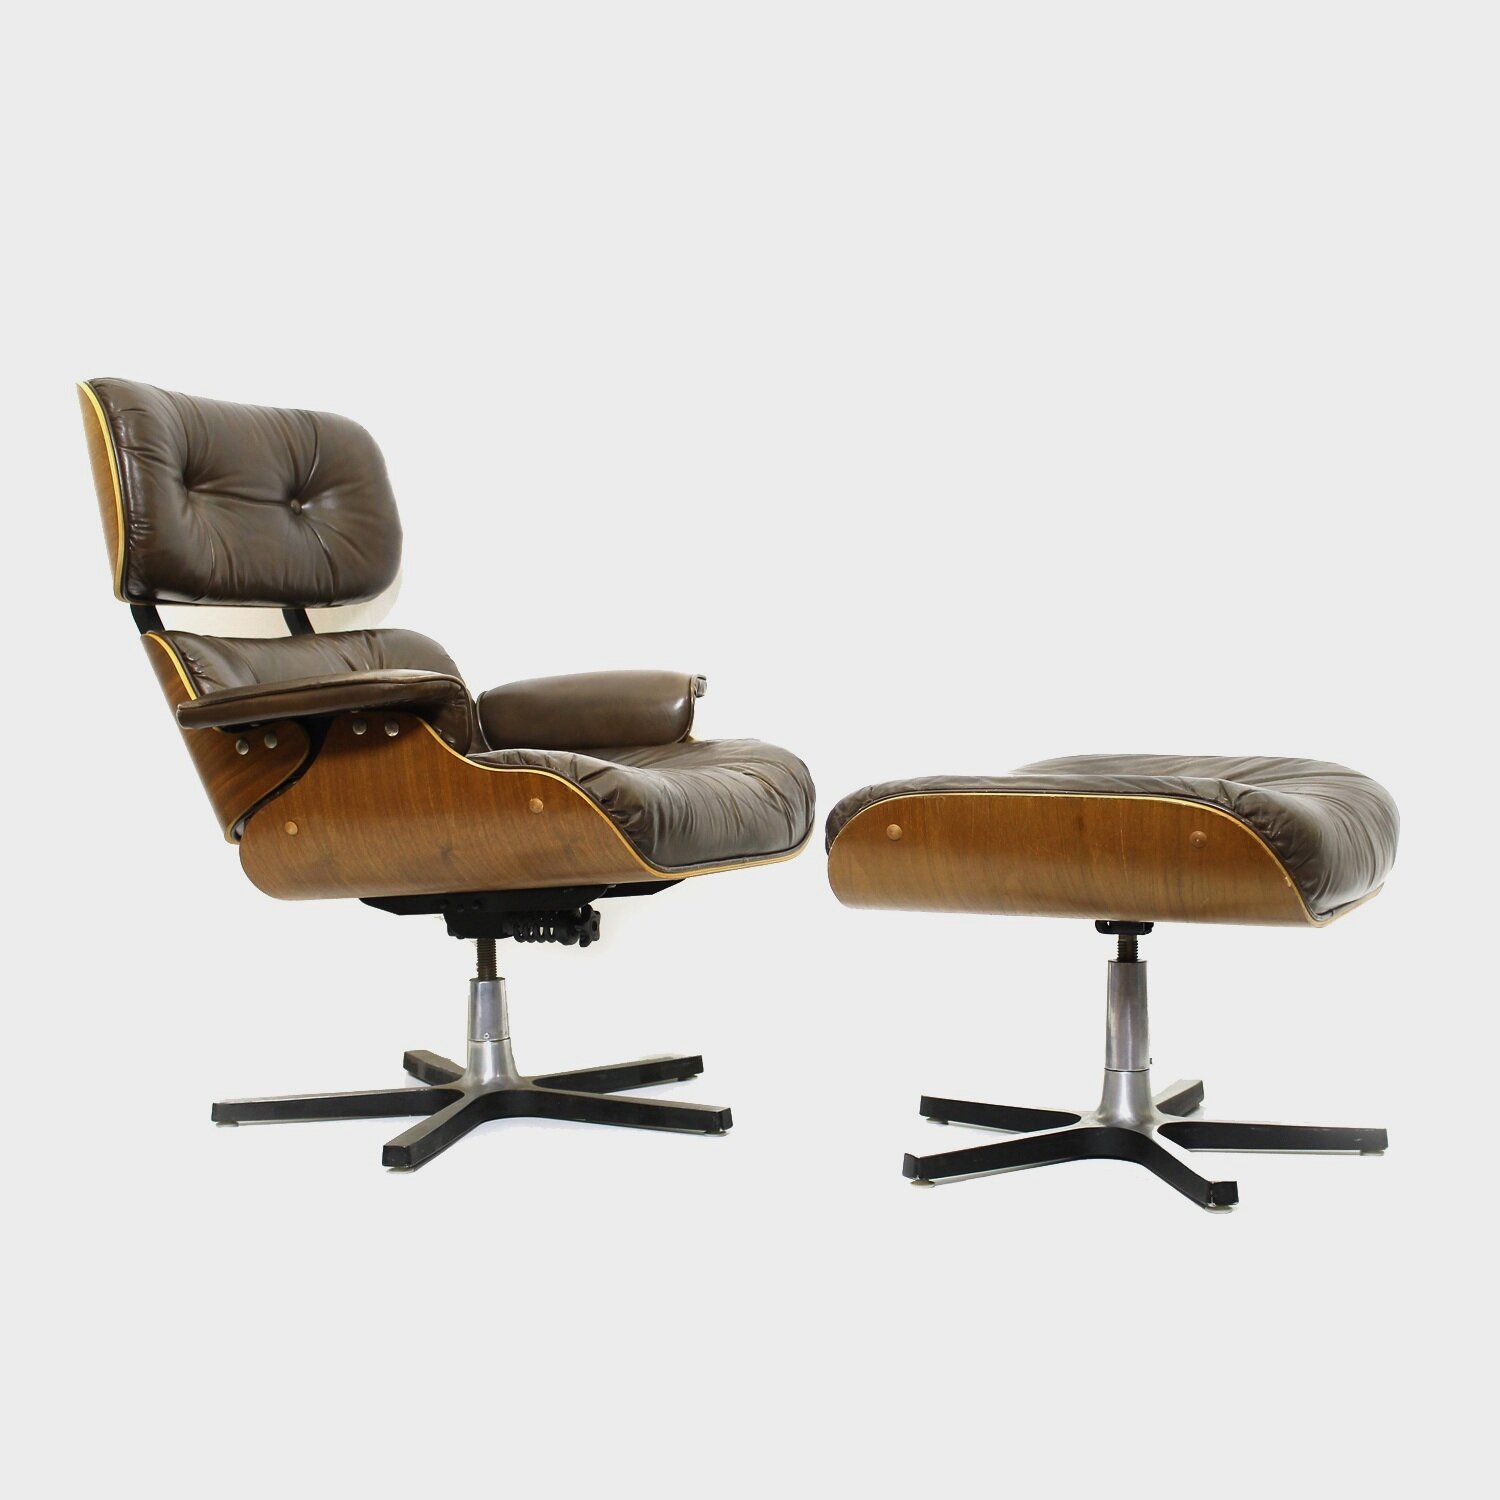 Vintage Canadian Made Eames Style Lounge Chair And Ottoman Sold